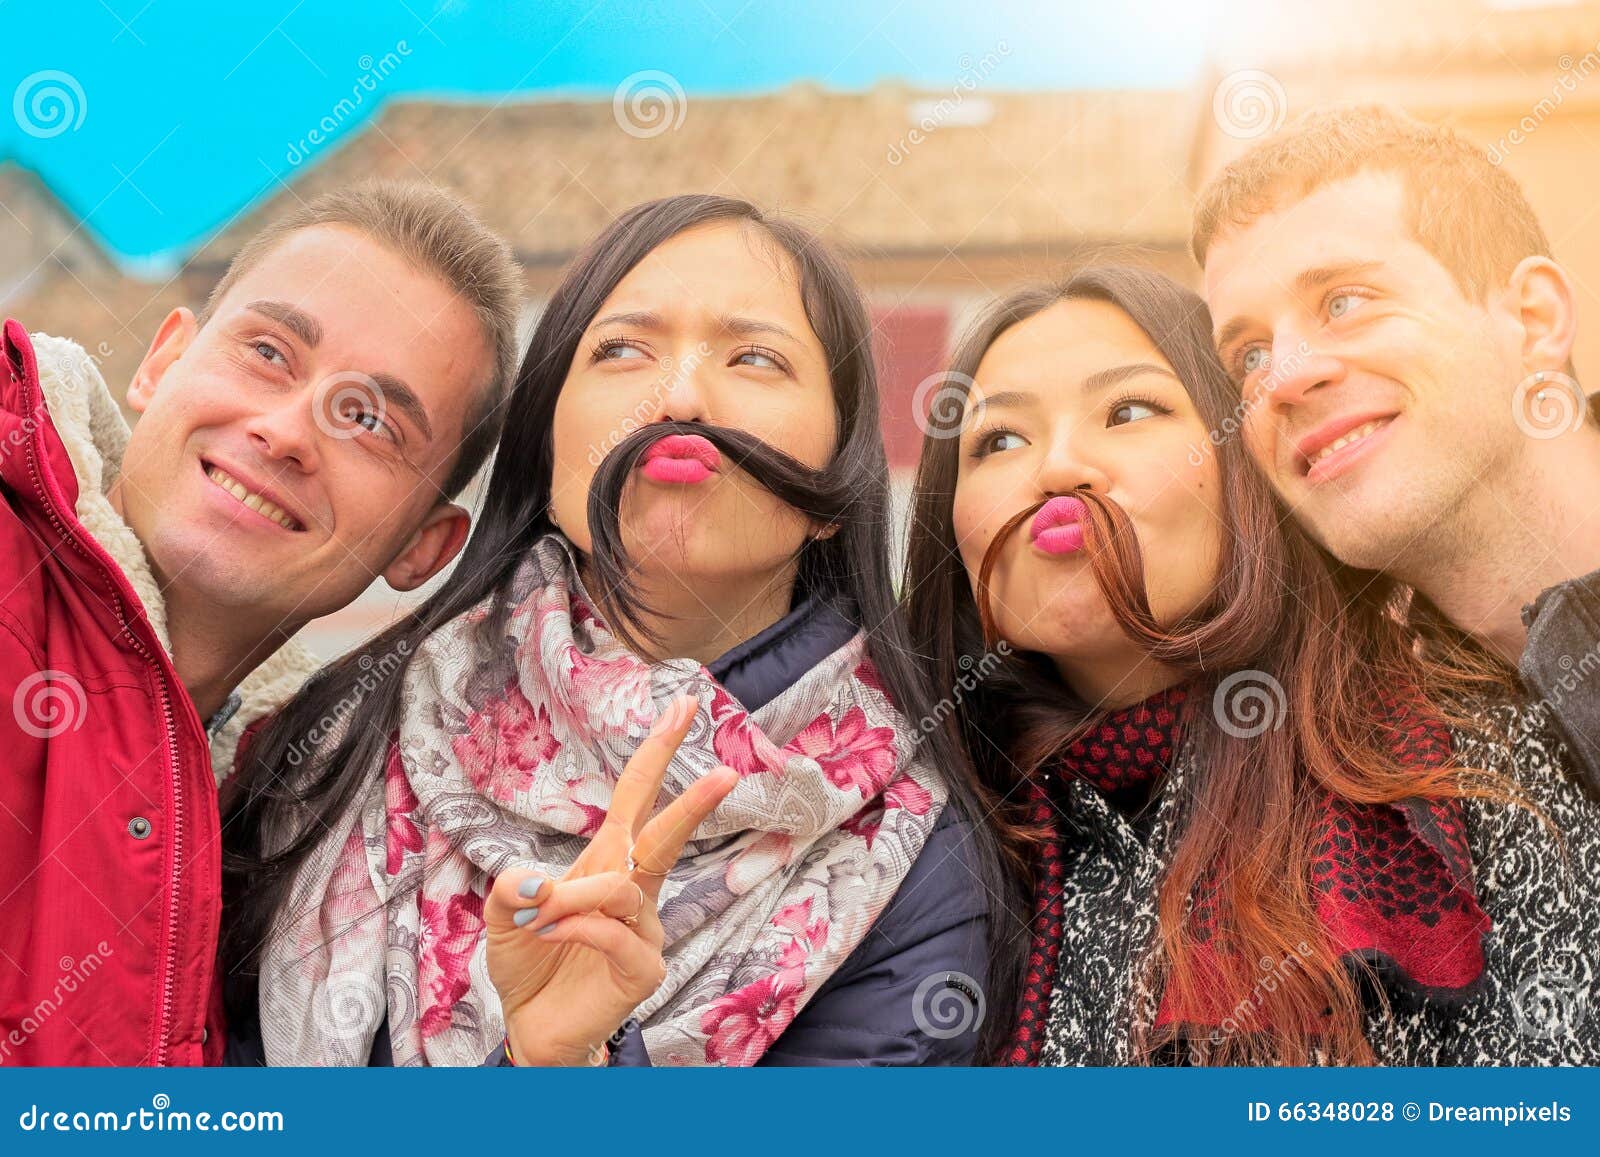 Laughing Best Friends Posing For A Selfie Outdoors In Autumn Stock Photo,  Picture and Royalty Free Image. Image 48076092.